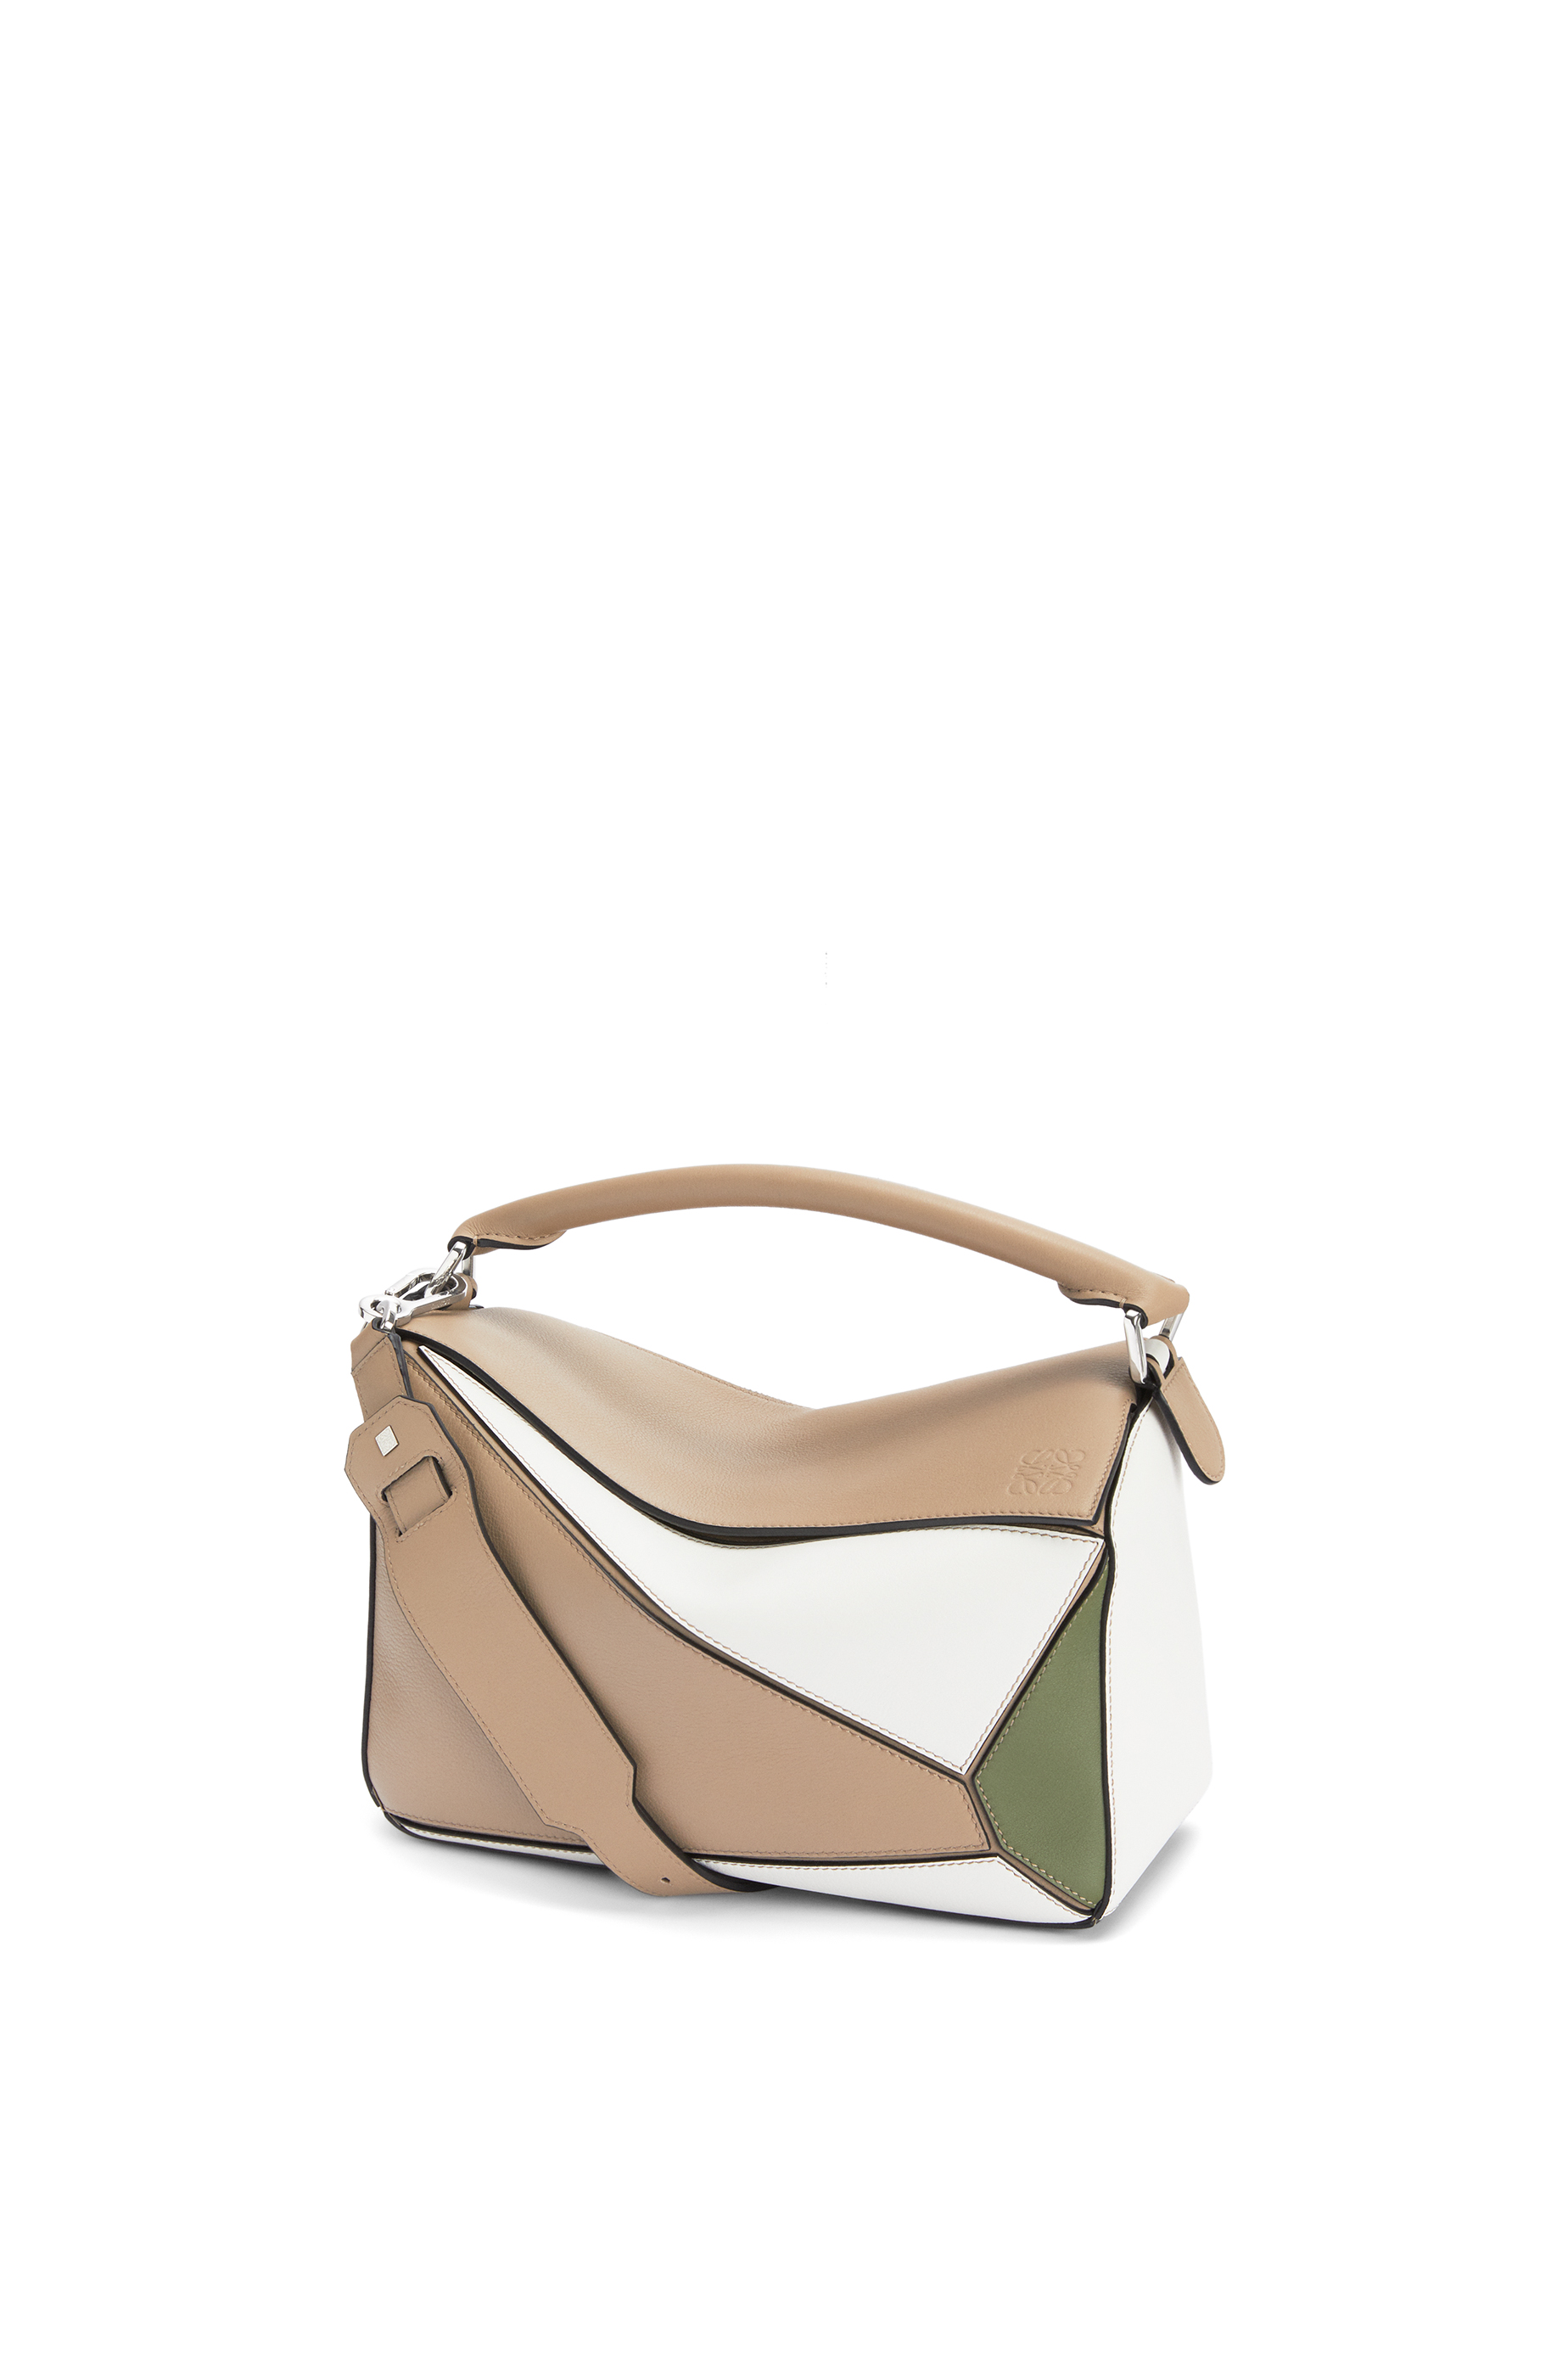 Puzzle bag in classic calfskin Sand 